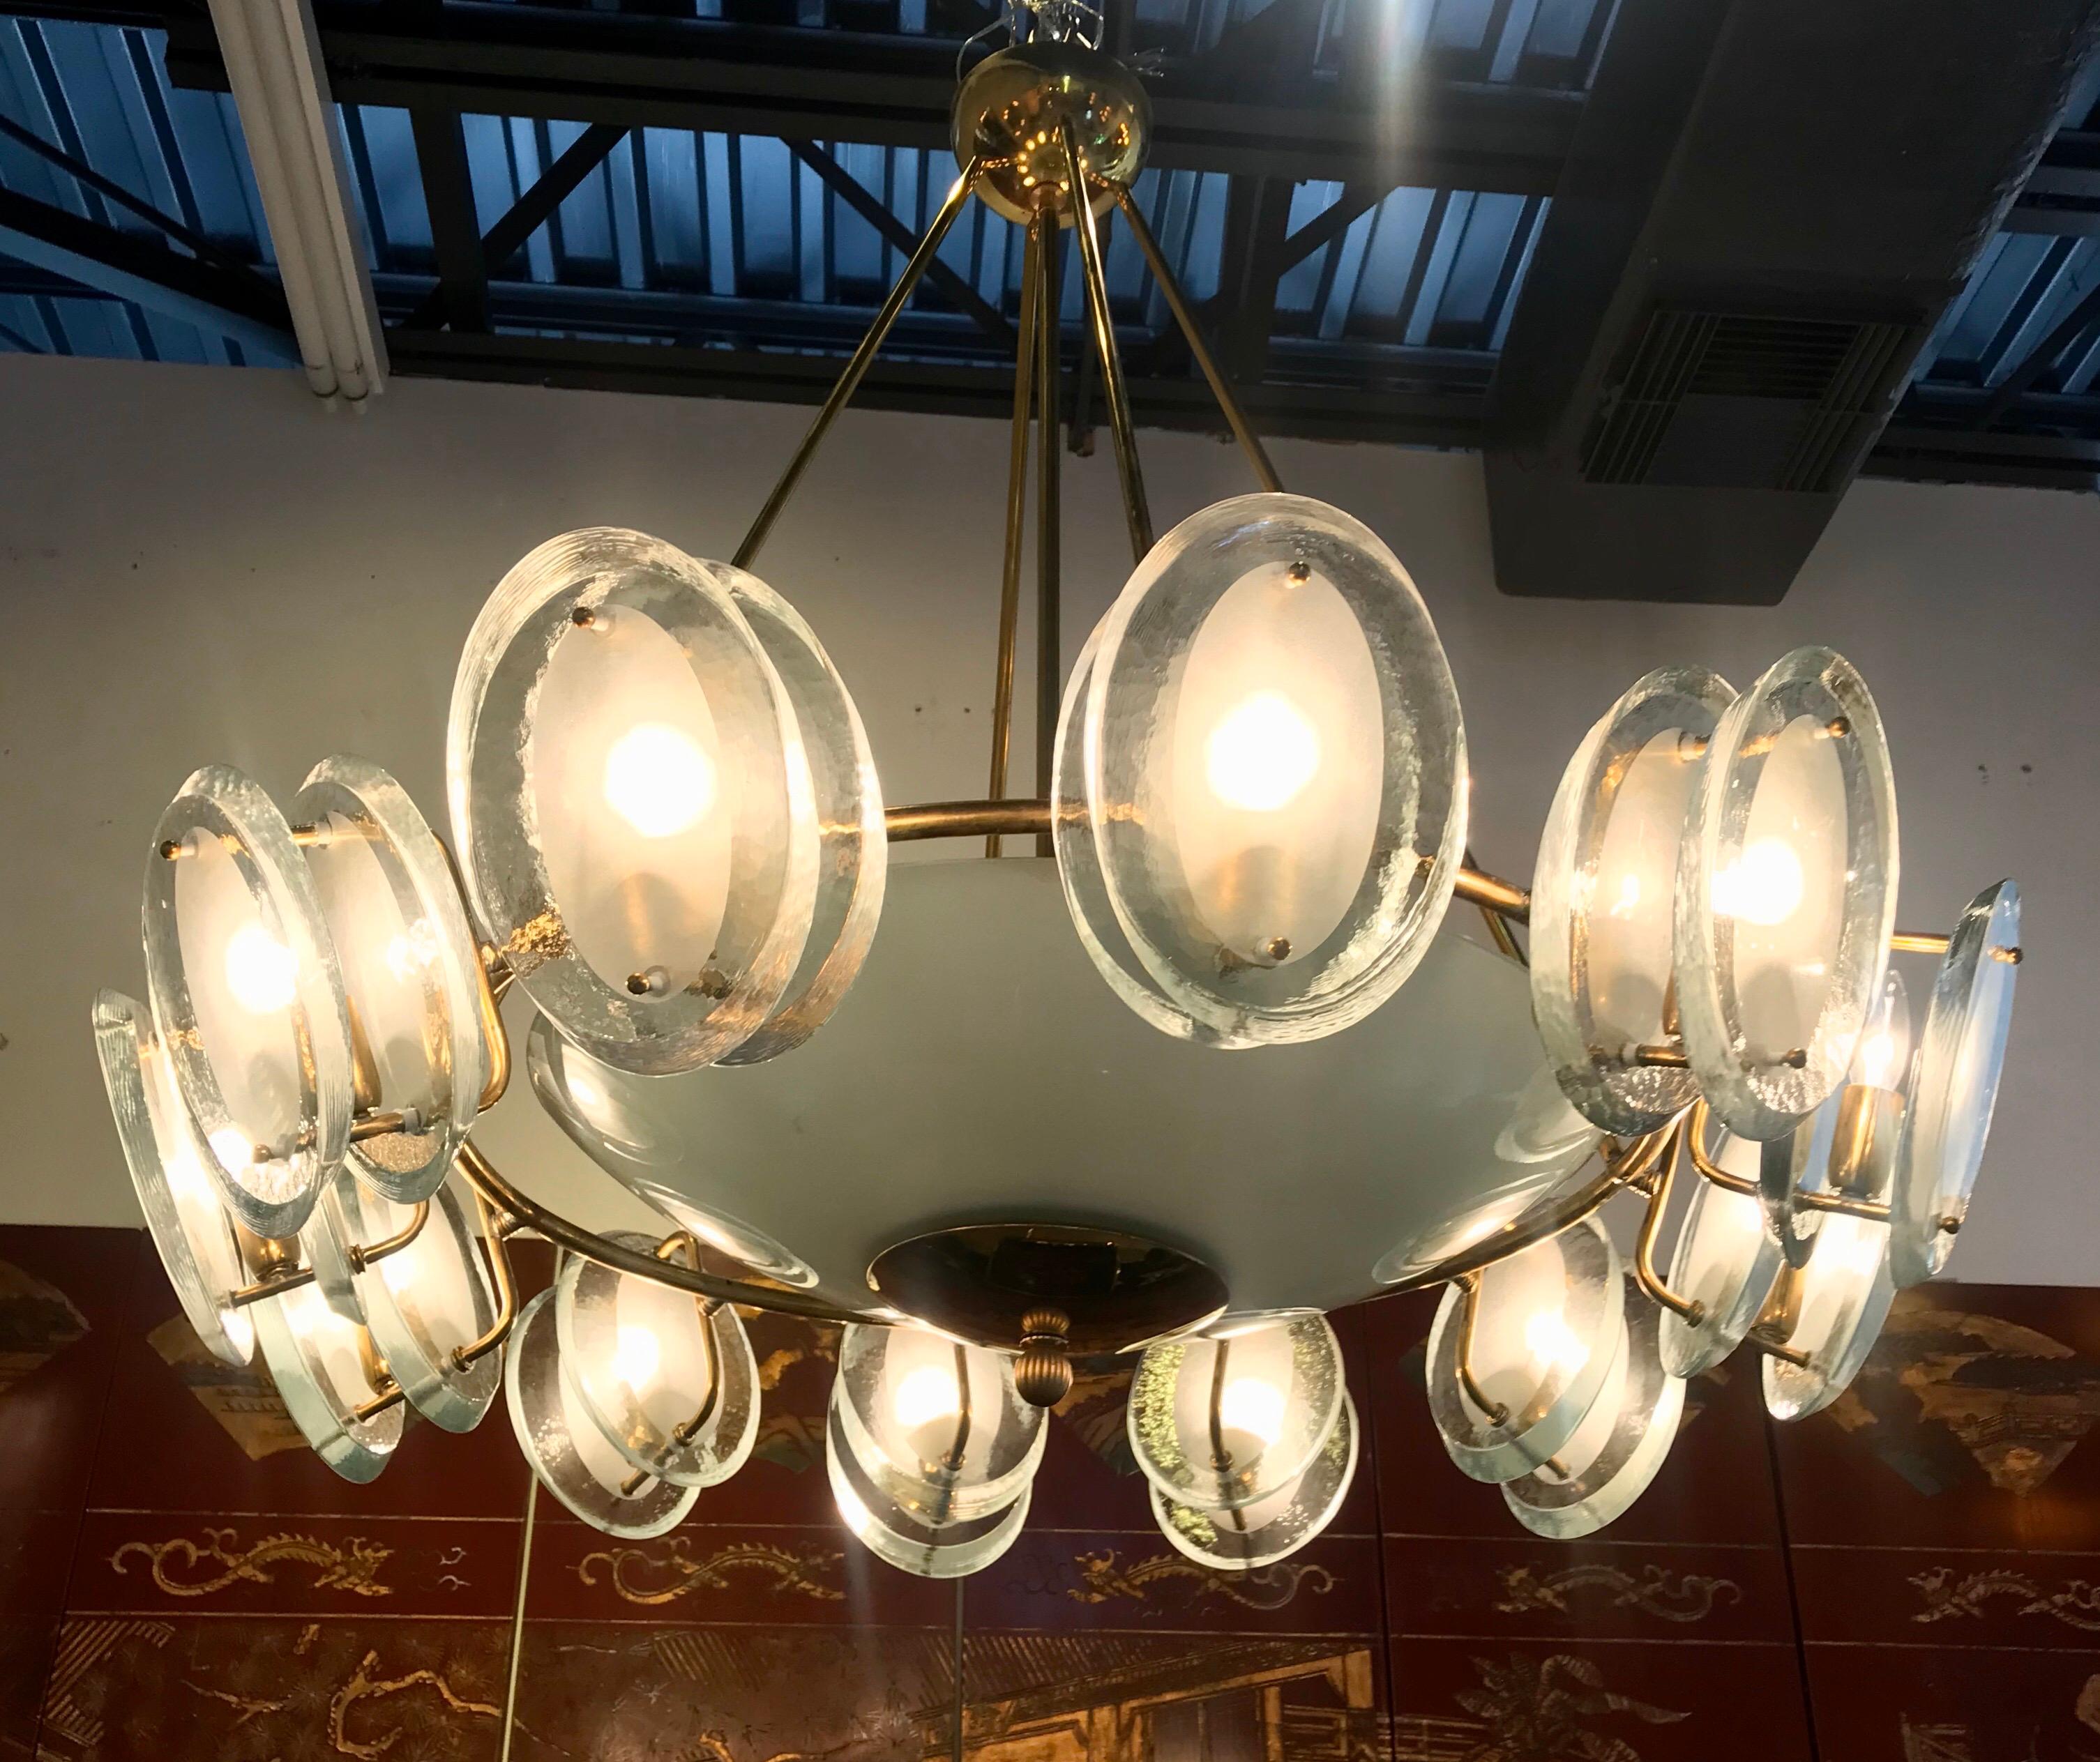 A beautiful glass and brass chandelier designed by Max Ingrand for Fontana Arte.